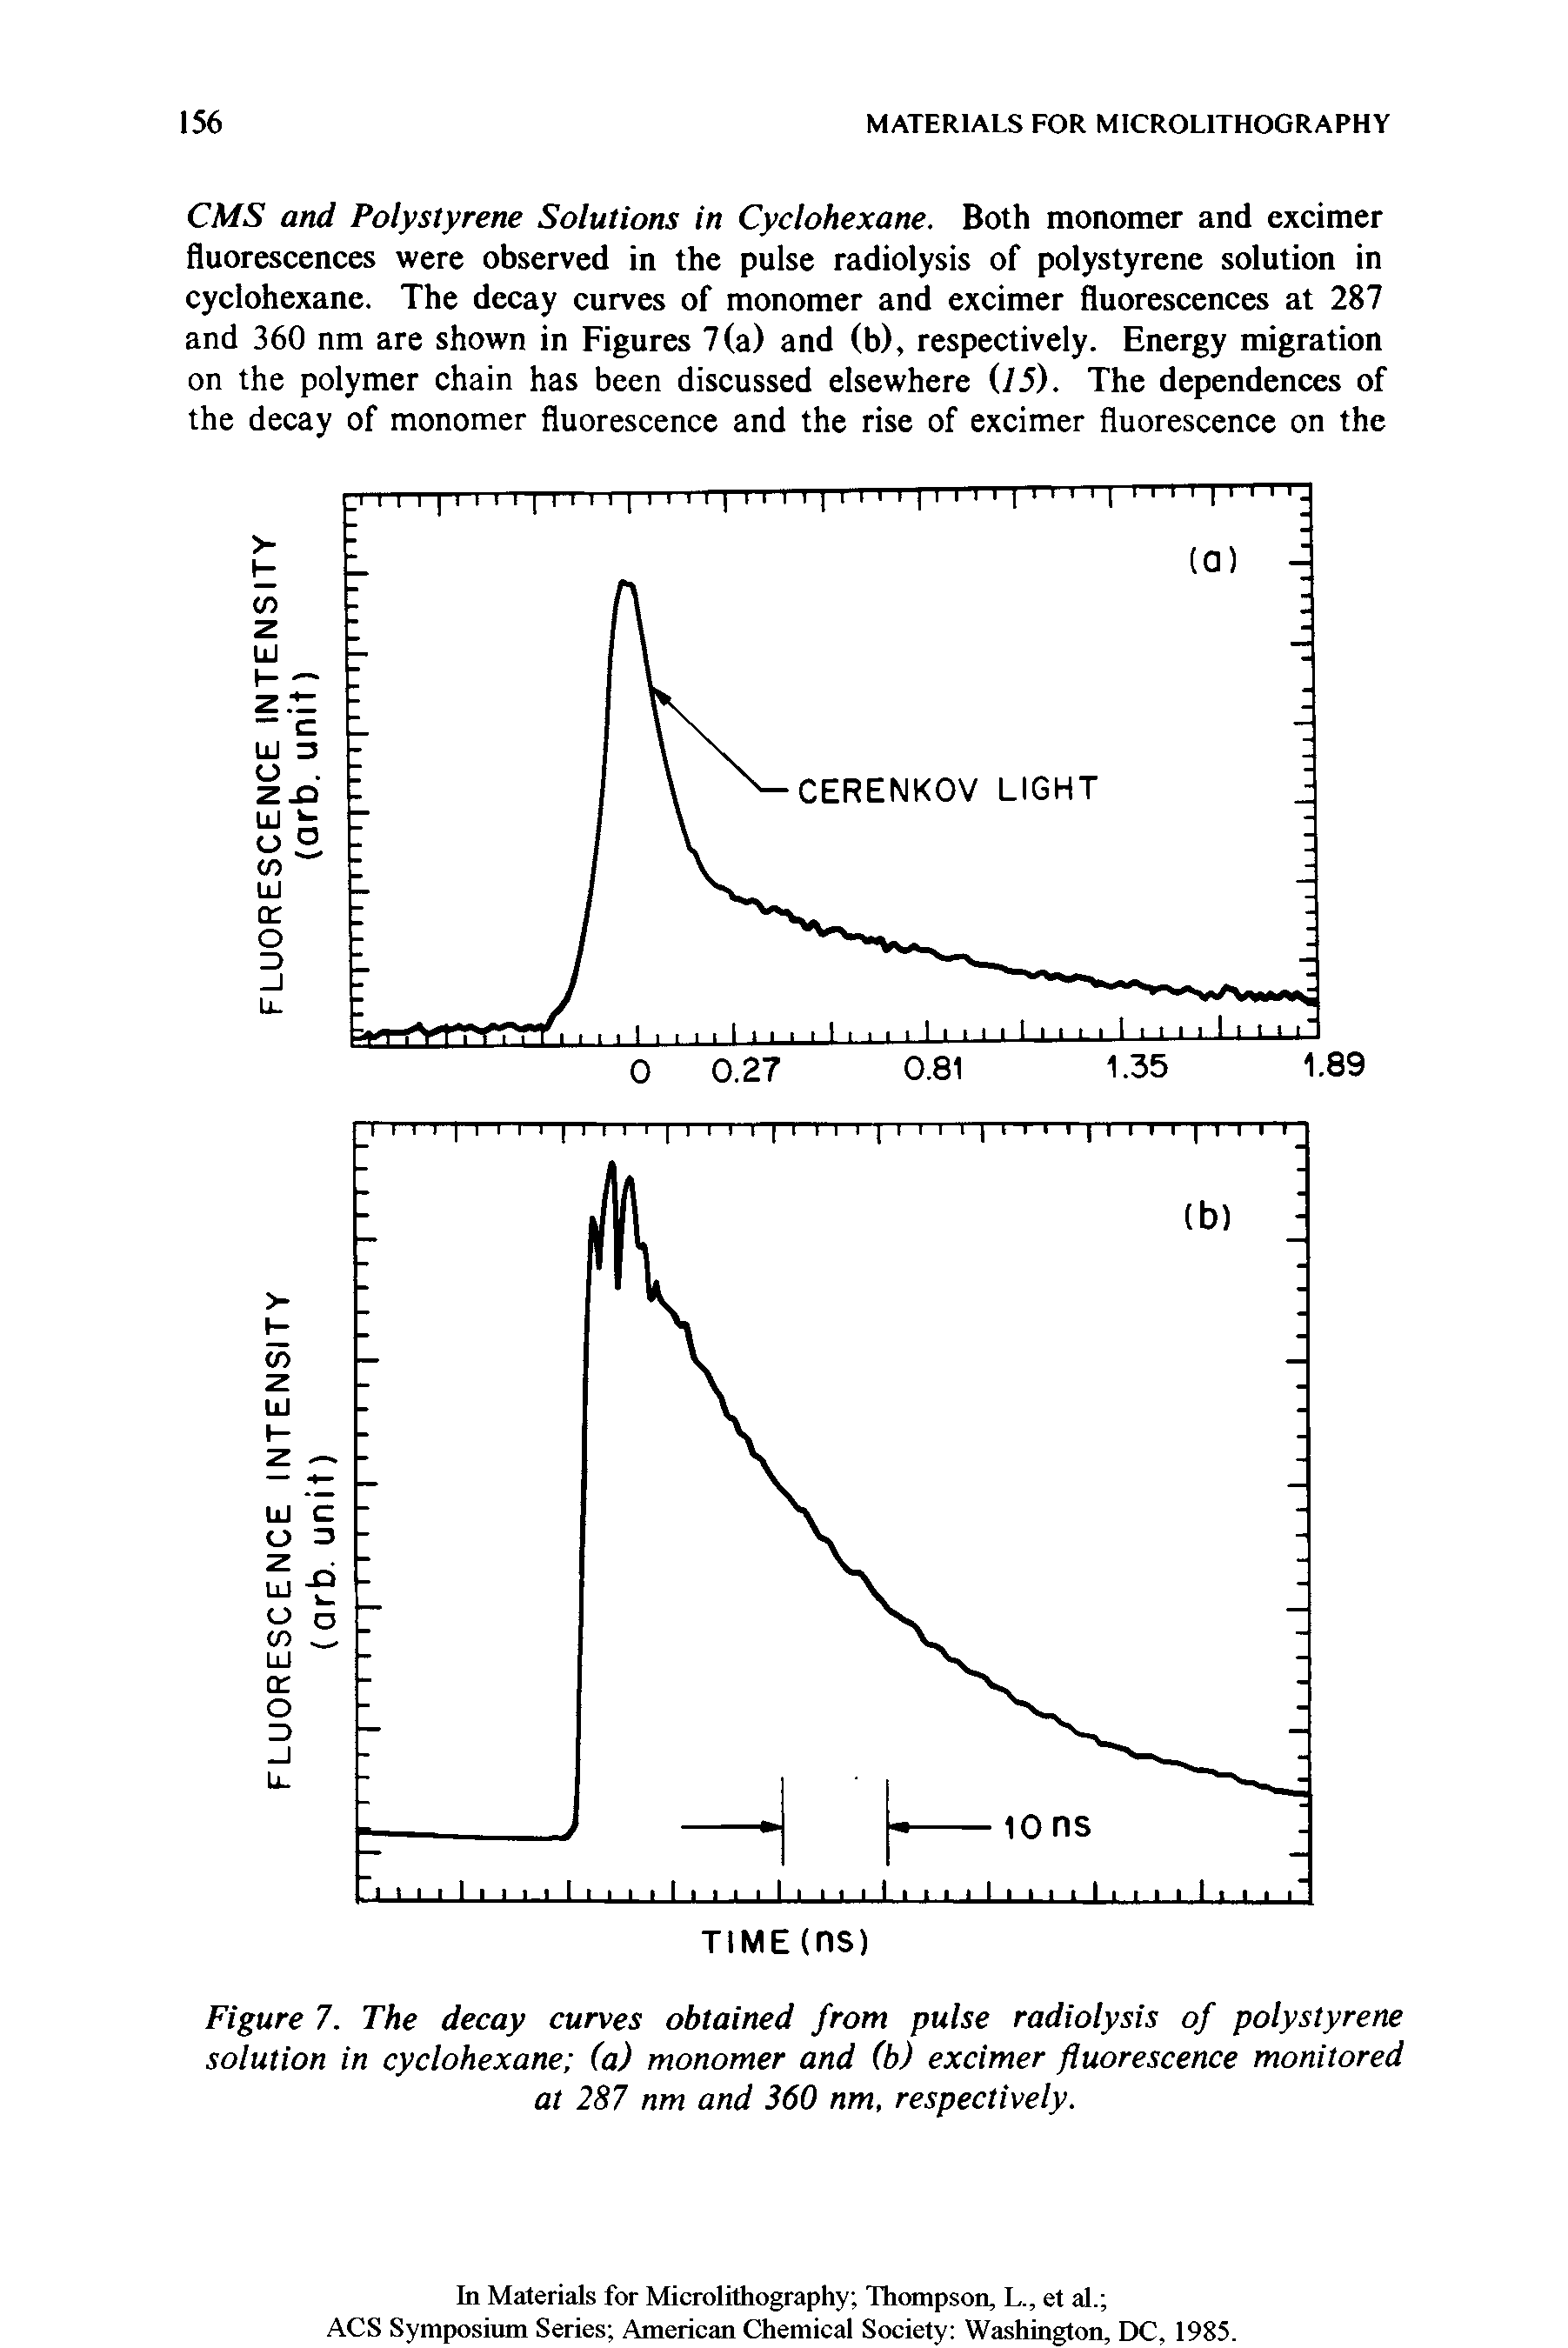 Figure 7. The decay curves obtained from pulse radiolysis of polystyrene solution in cyclohexane (a) monomer and (b) excimer fluorescence monitored at 287 nm and 360 nm, respectively.